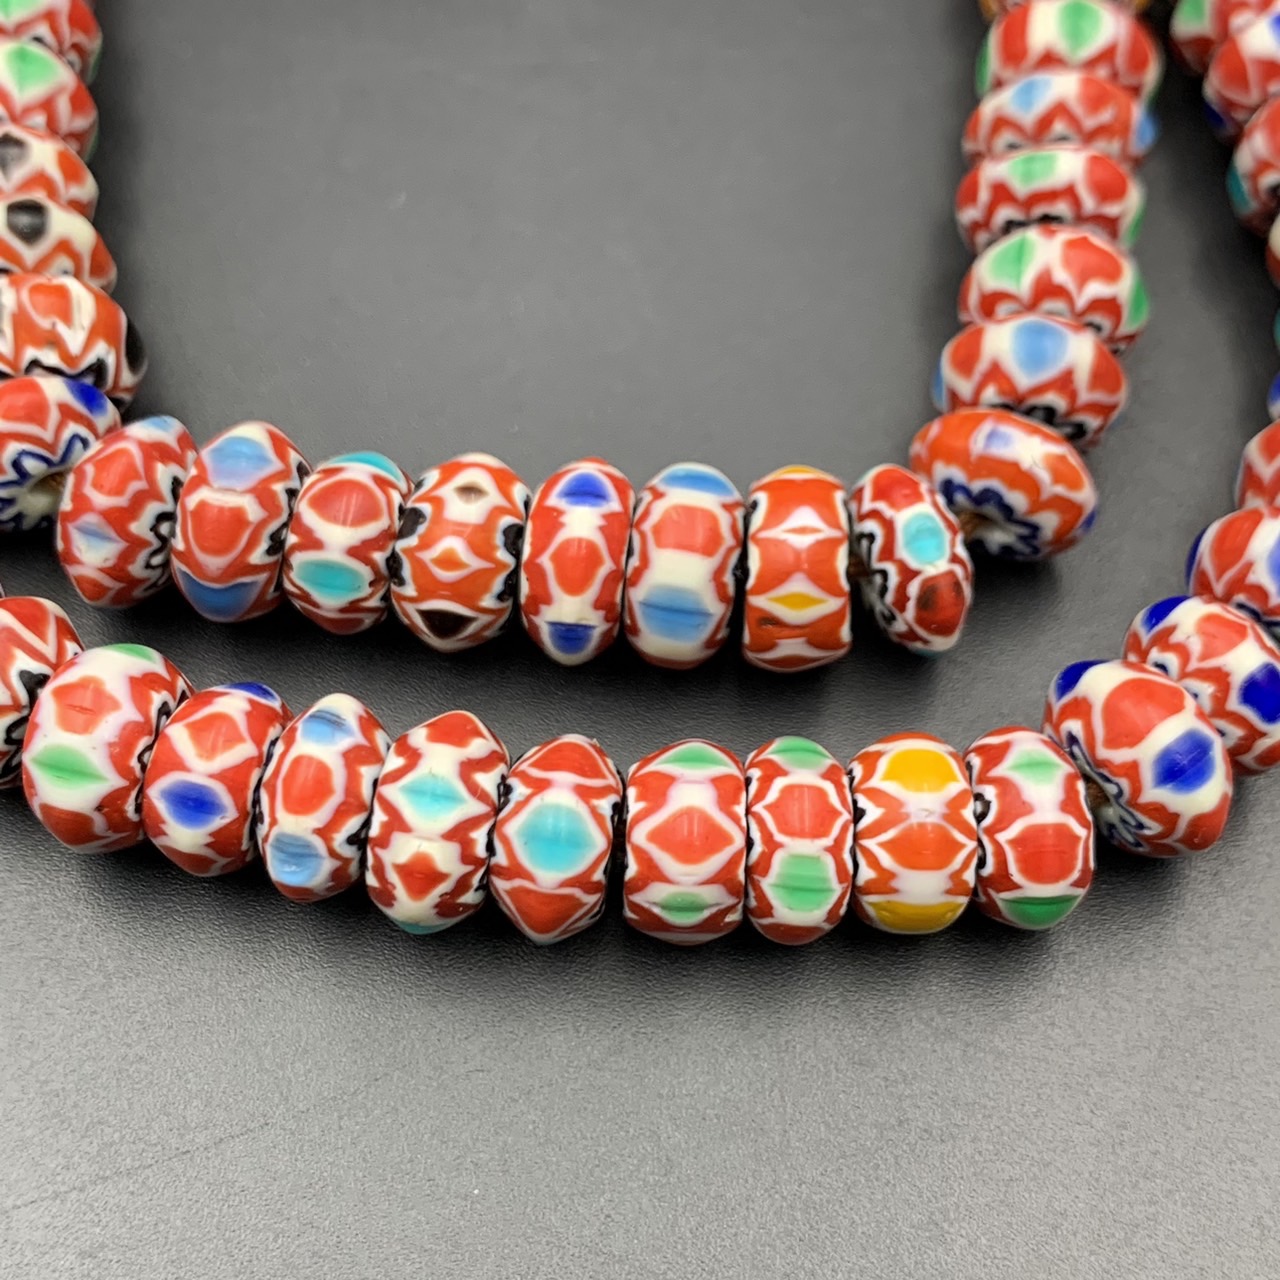 Wonderful Tiny Vintage Chevron Trade African Glass Beads Strand, LPBR-0311 - Image 6 of 11